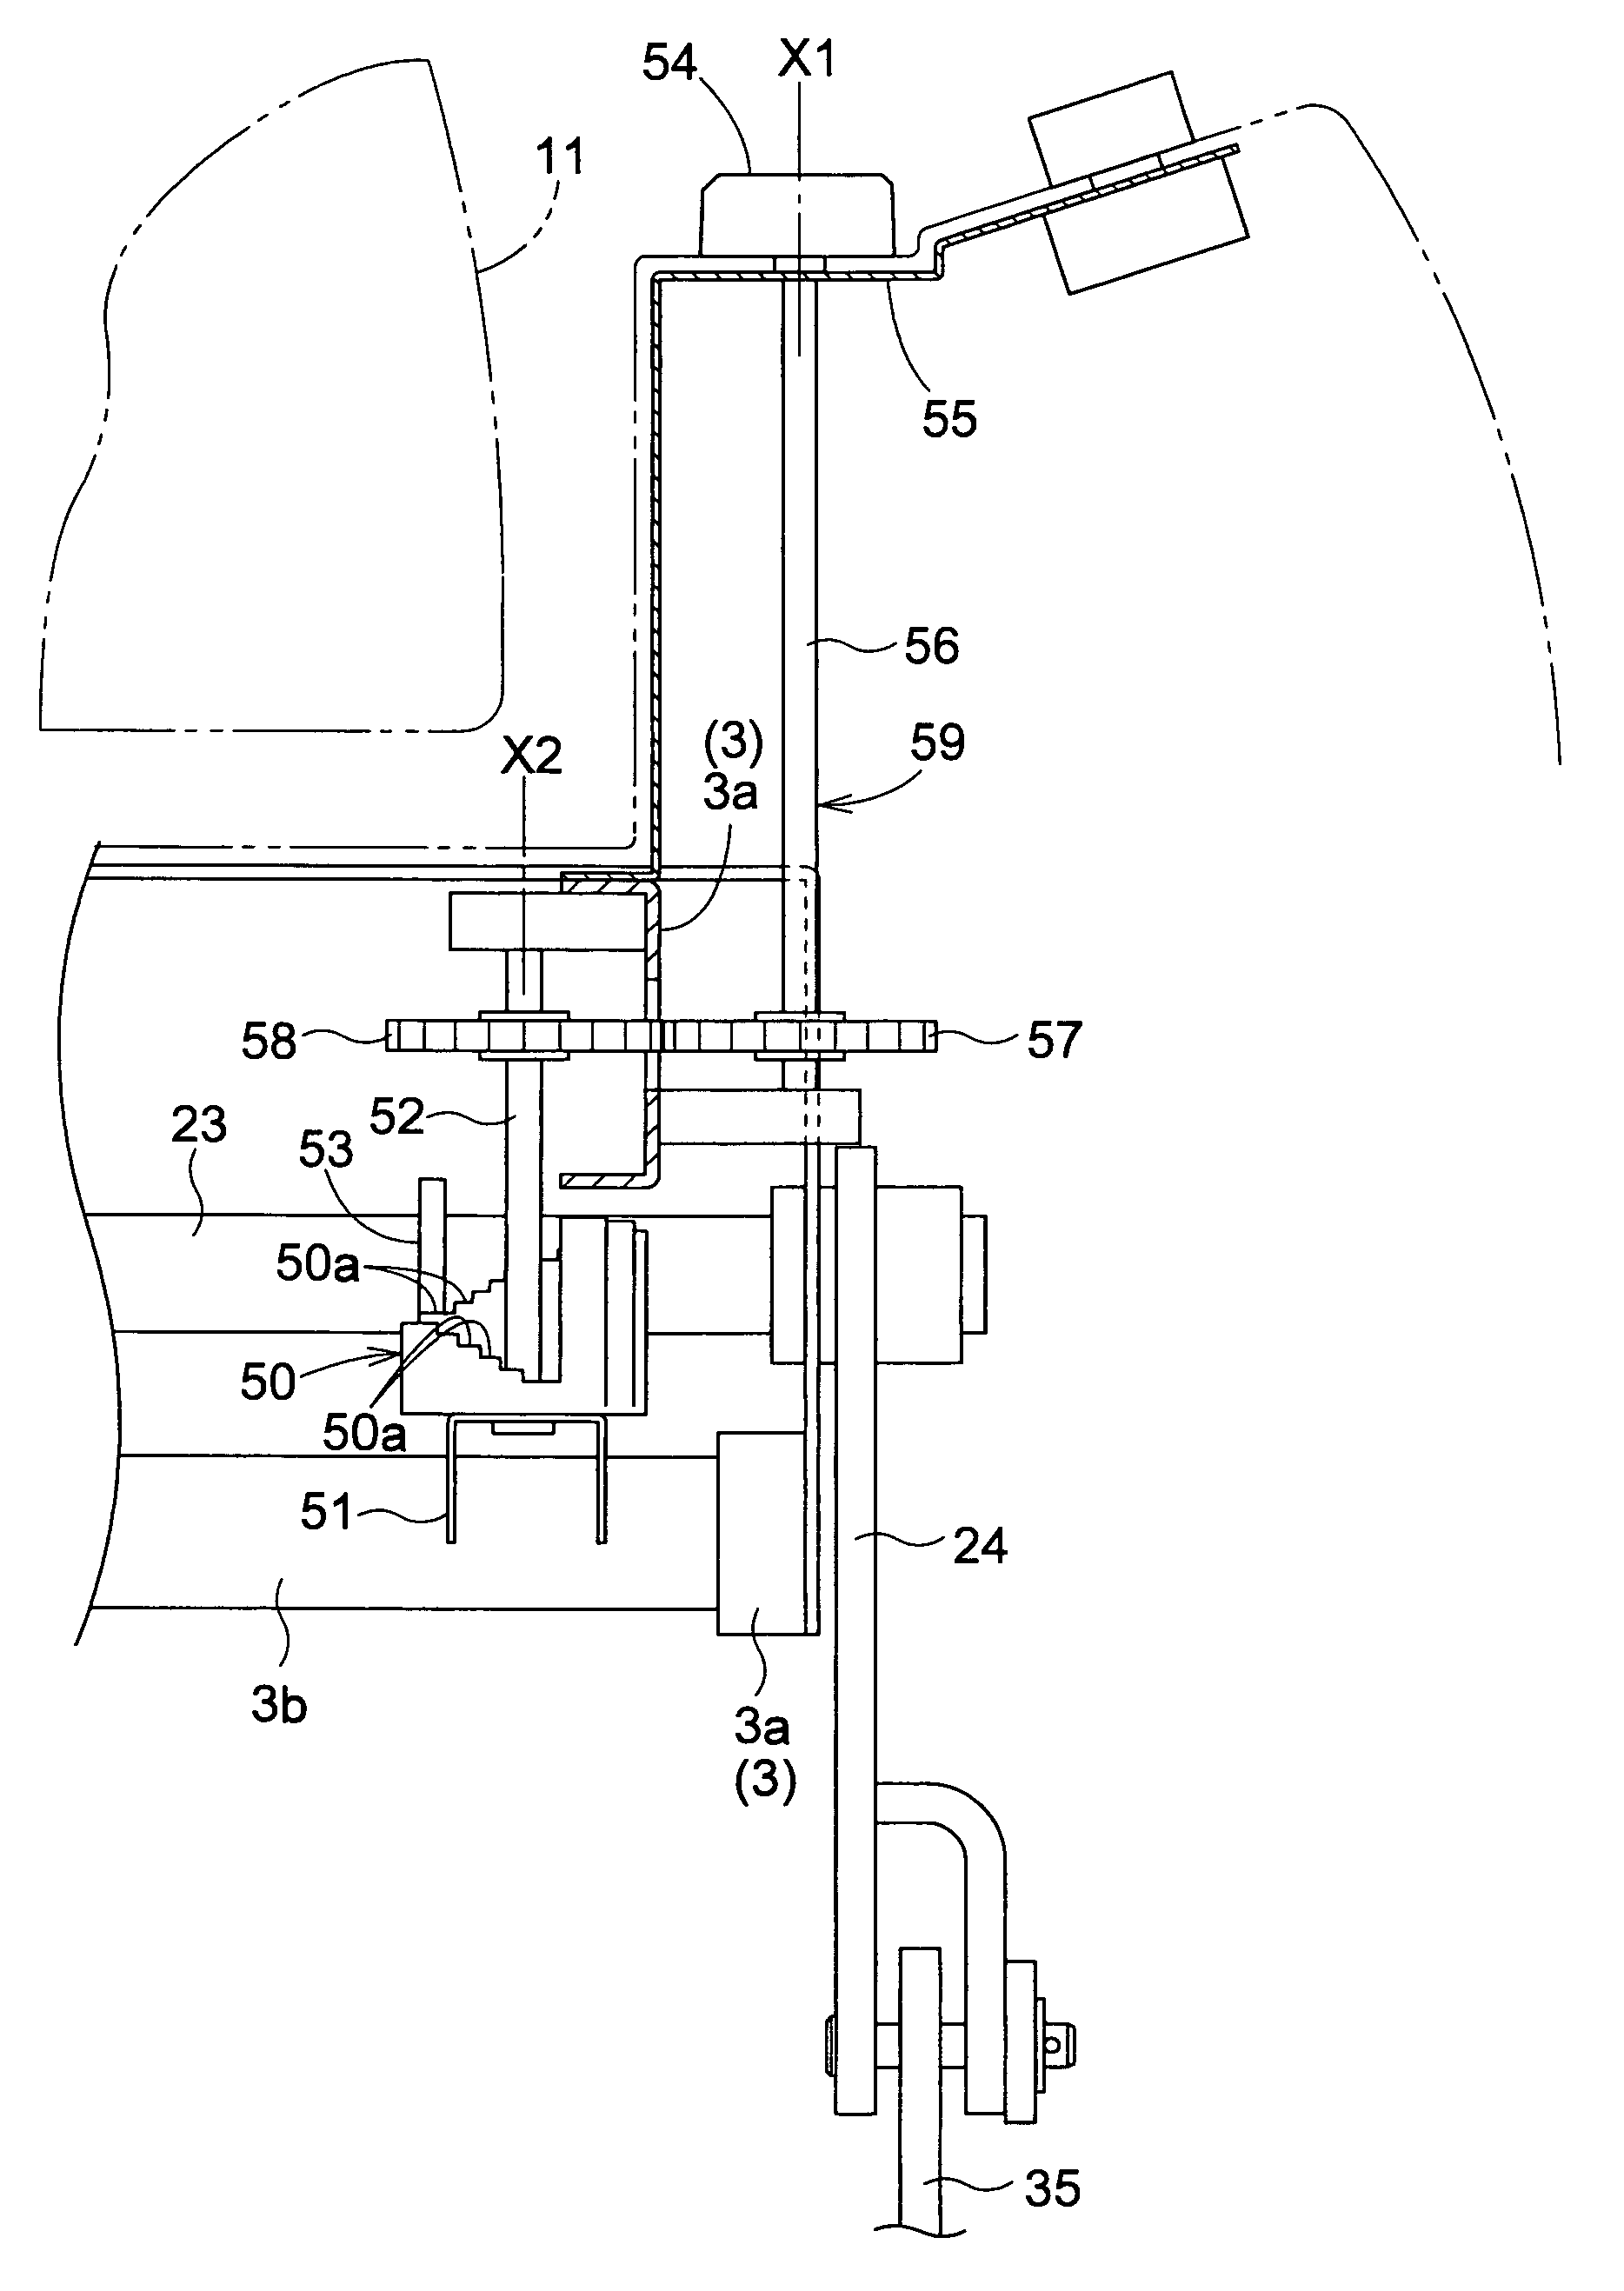 Lower limit adjustment mechanism for riding type mower